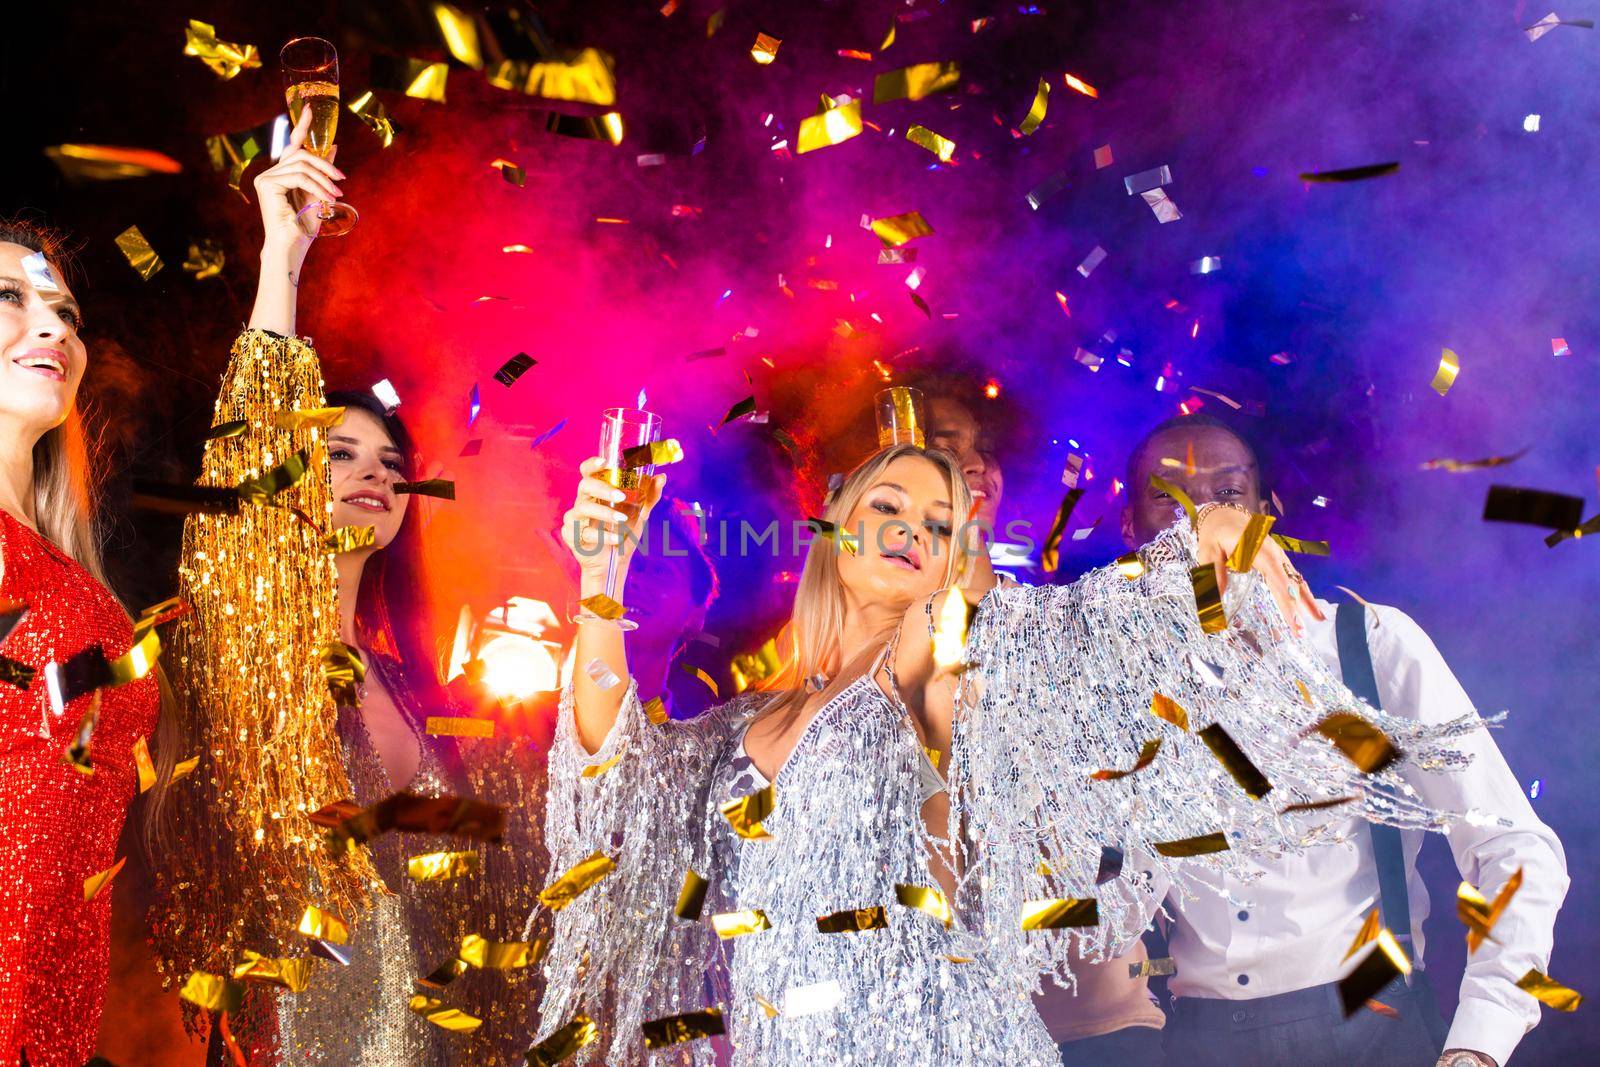 People dance at party in nightclub, drink champagne in falling confetti